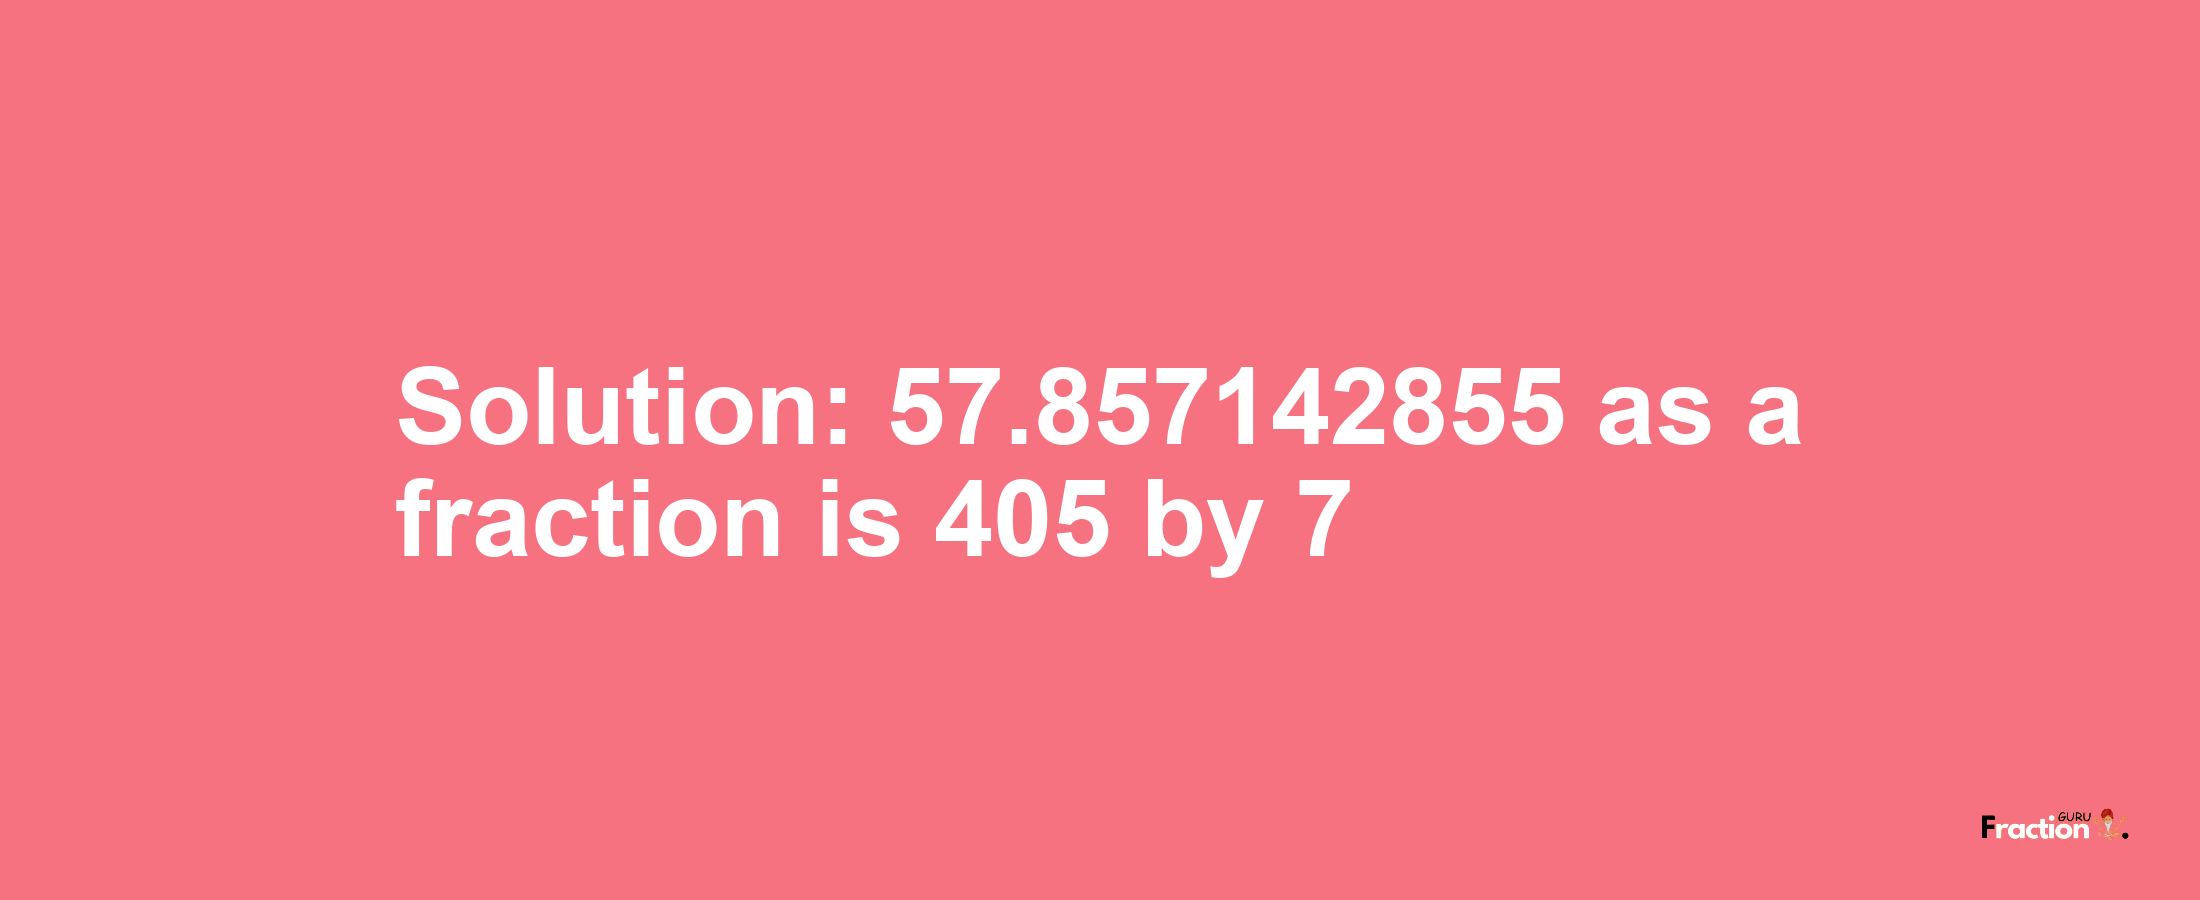 Solution:57.857142855 as a fraction is 405/7